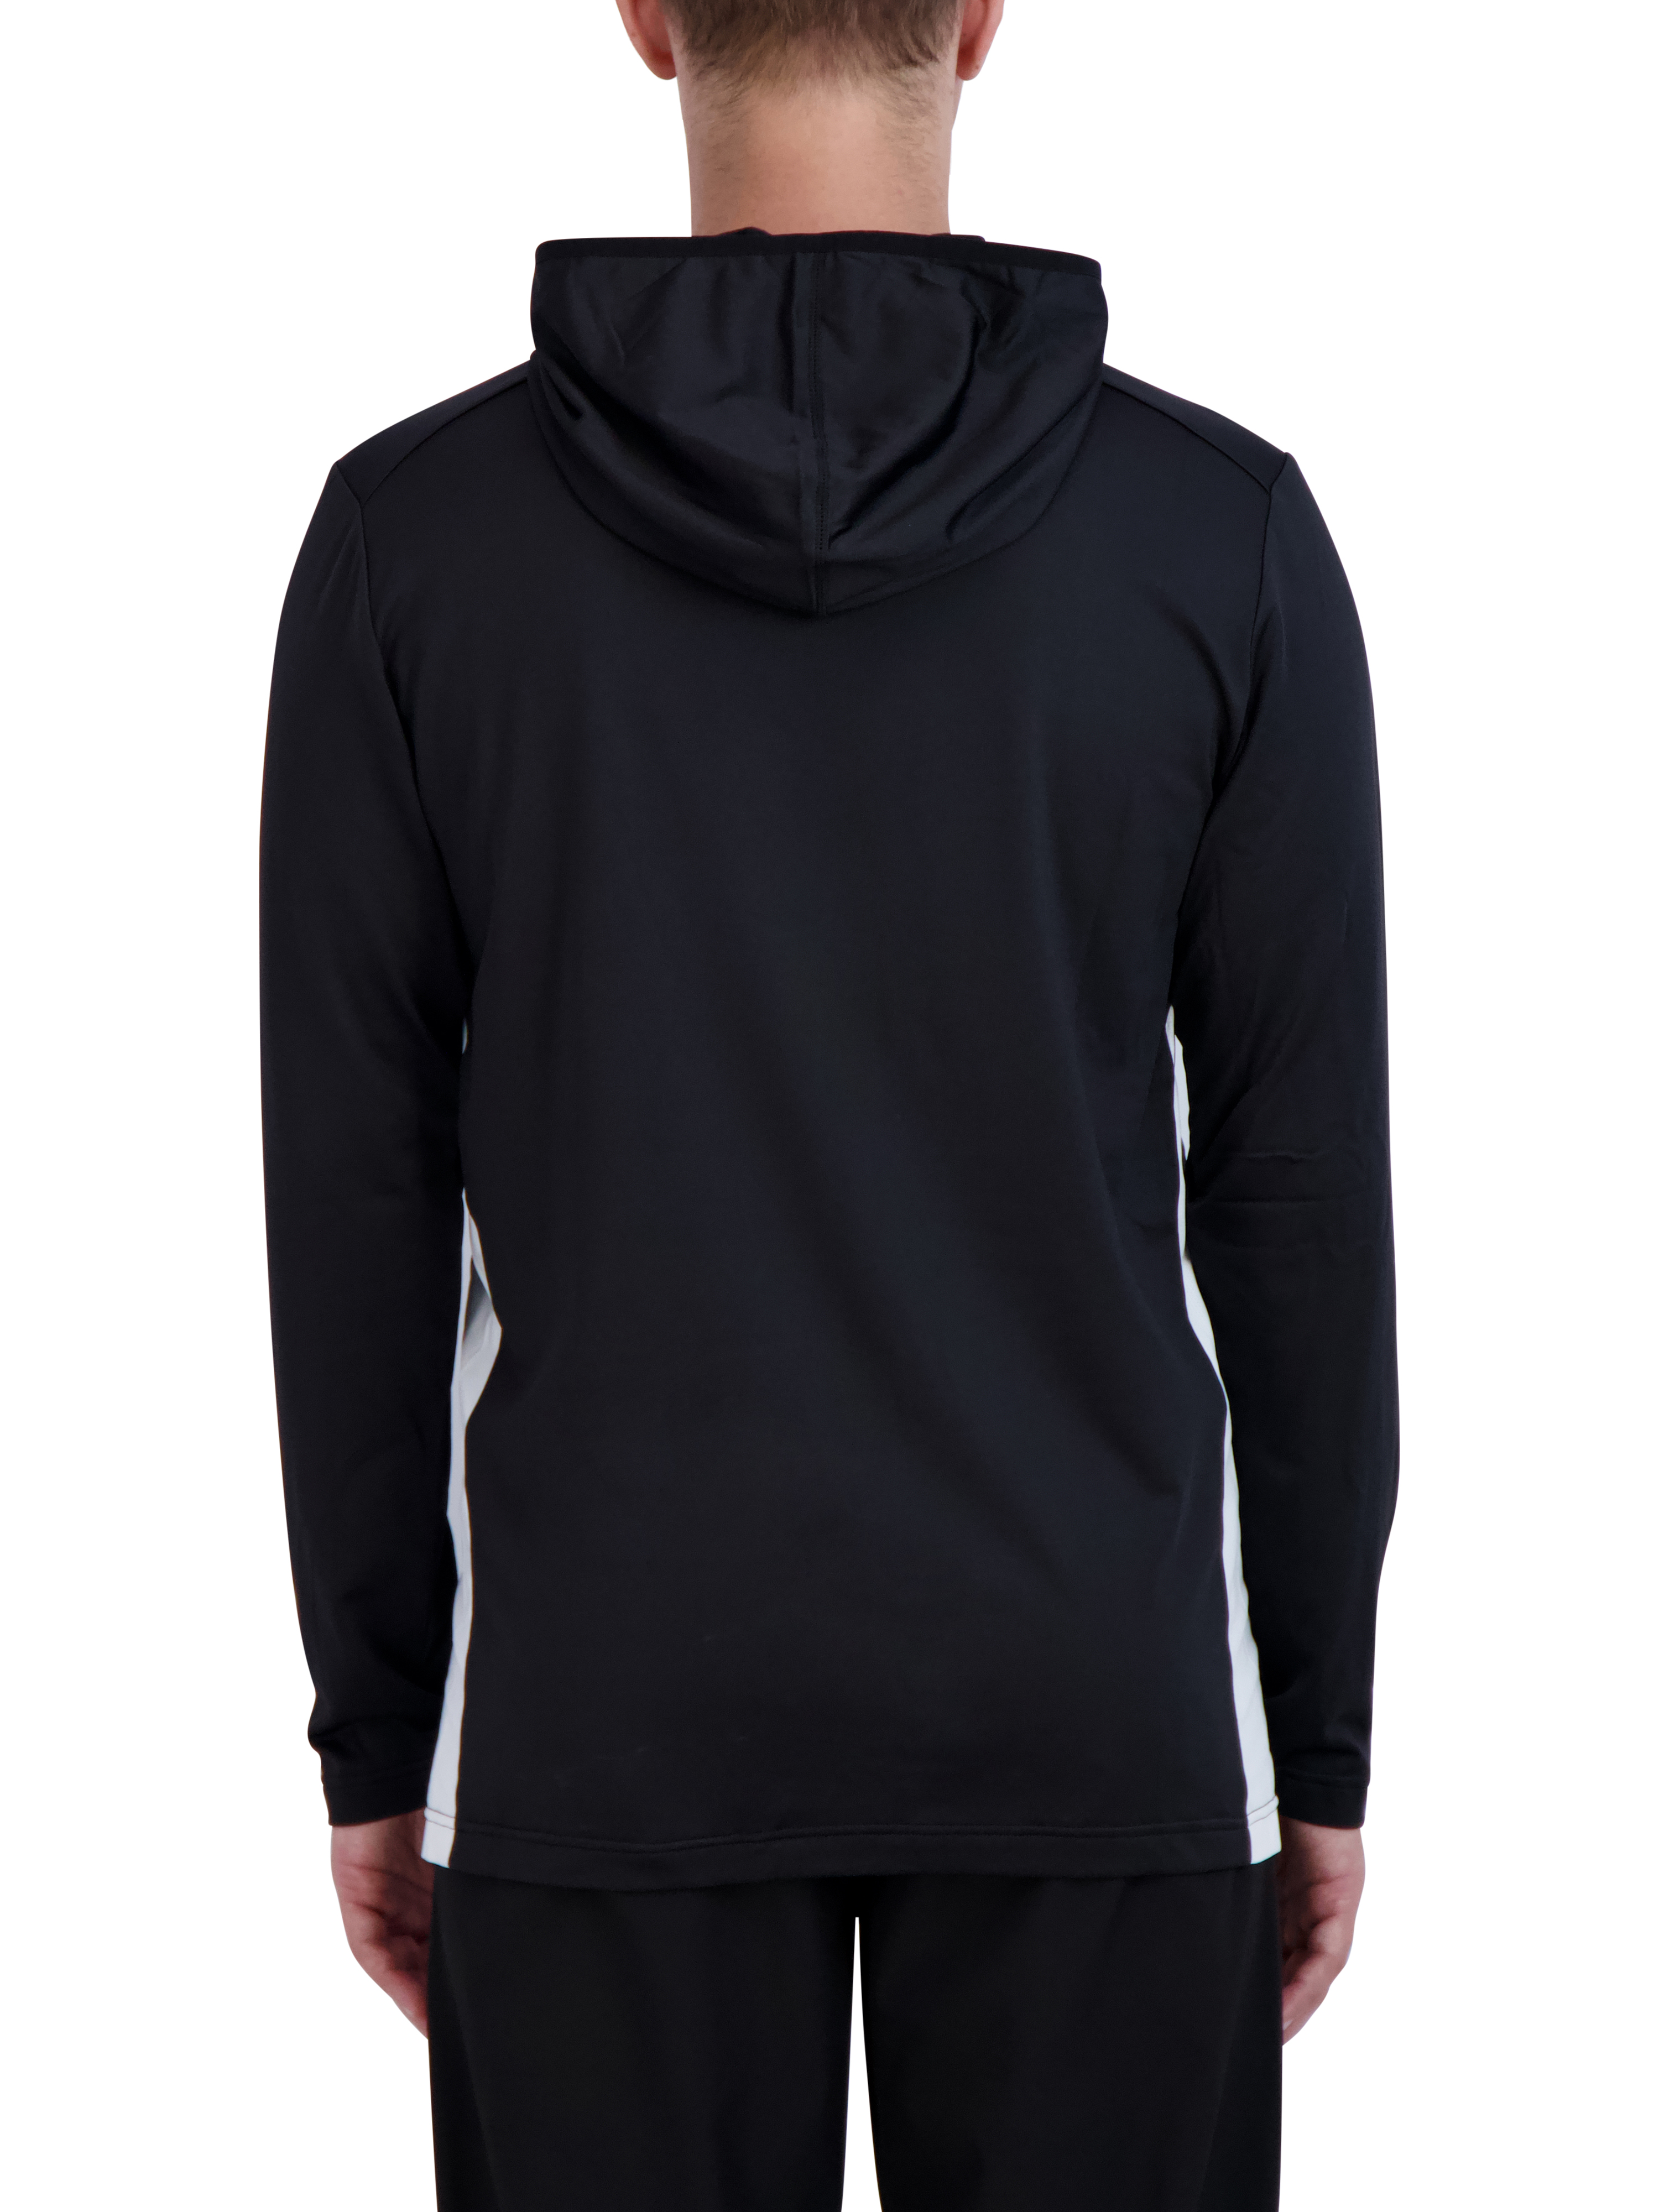 Reebok Men's Pullover Hoodie, up to Size 3XL - image 5 of 6